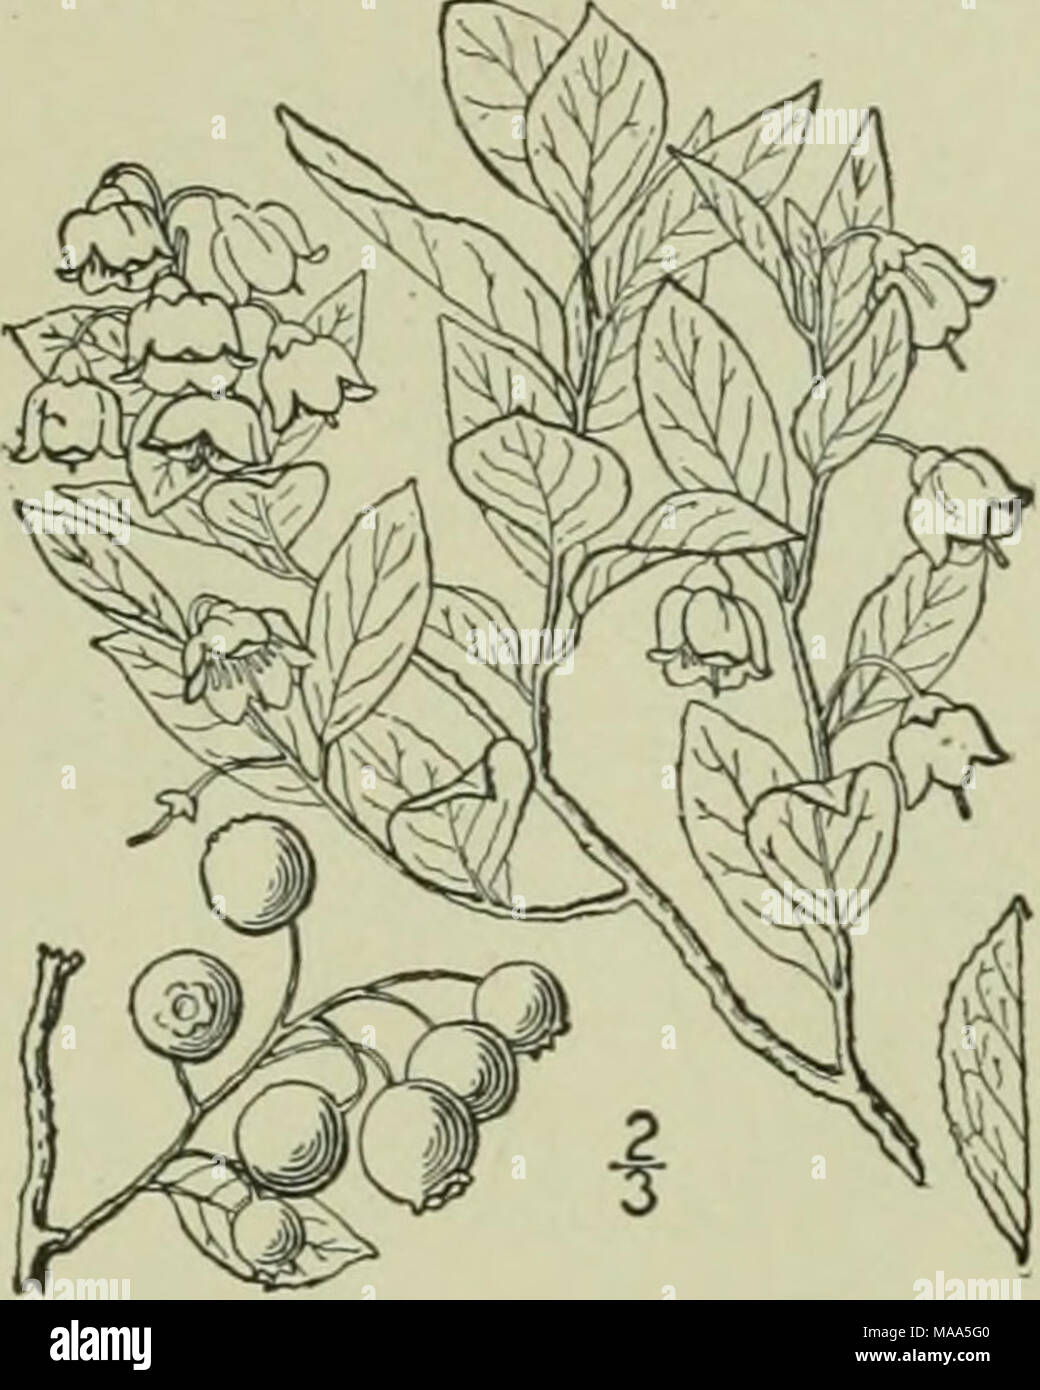 . An illustrated flora of the northern United States, Canada and the British possessions : from Newfoundland to the parallel of the southern boundary of Virginia and from the Atlantic Ocean westward to the 102nd meridian . V. uliginosu V. caespitosi V. membran V. ovalifoliu nless. V. pallidum. :-awned. Most or all the flowers 4-parted and stamens 8. Flowers all or nearly all 5-parted, and stamens 10. Shrub 3'-6' high : leaves obovate or cuneate. Shrubs i°-i2° high; leaves oval or oblong; northern species. Leaves serrulate, green both sides ; berry purple-black. Leaves entire or nearly so. pale Stock Photo